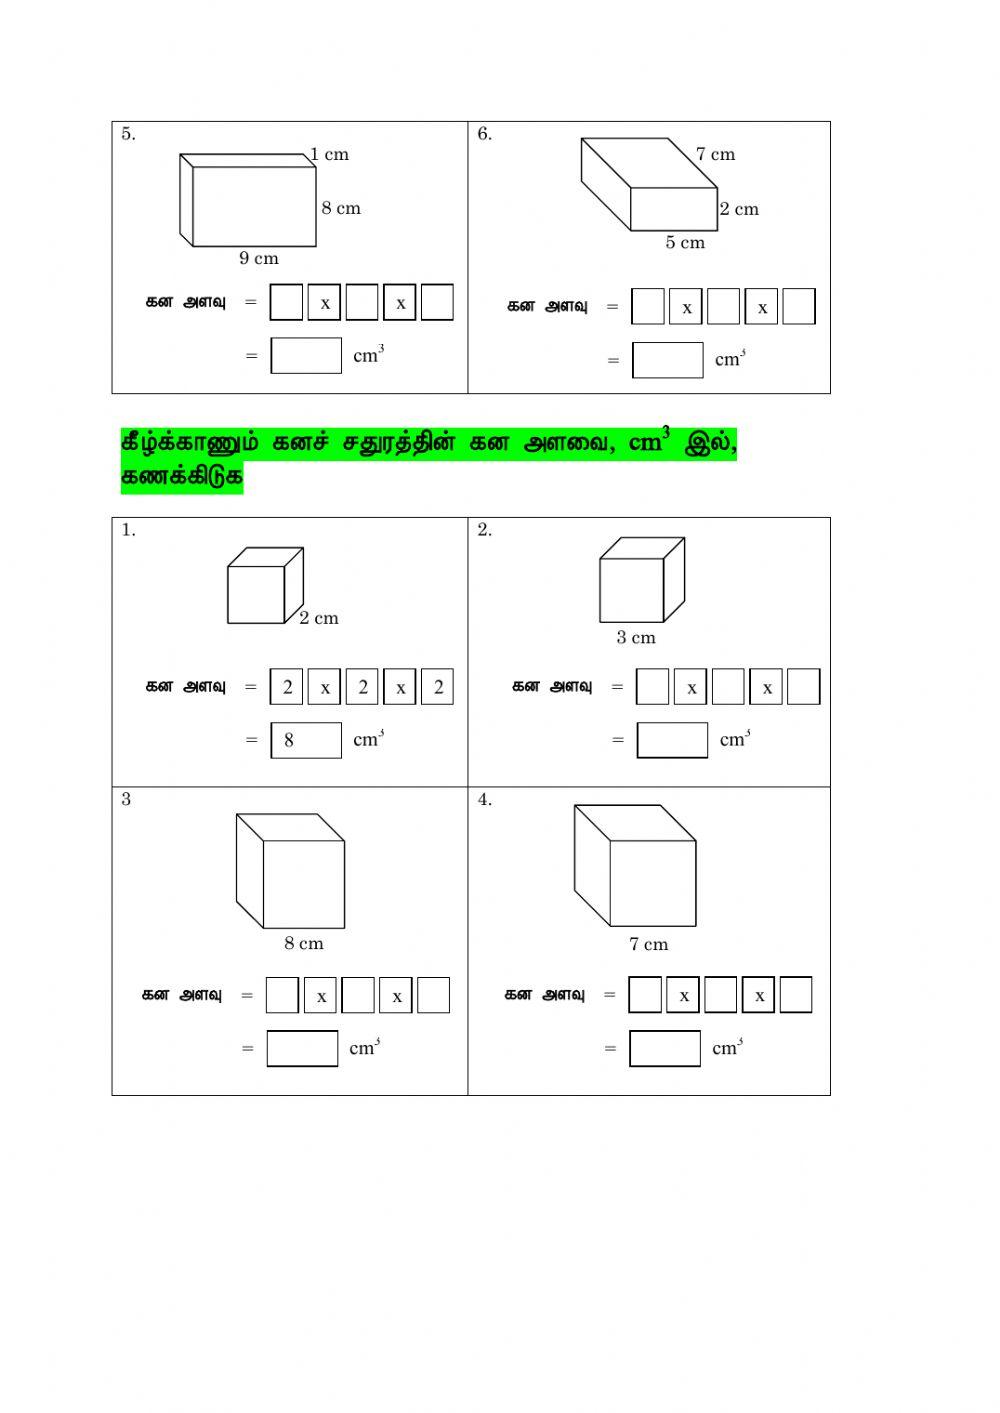 Volume of cube and cuboid